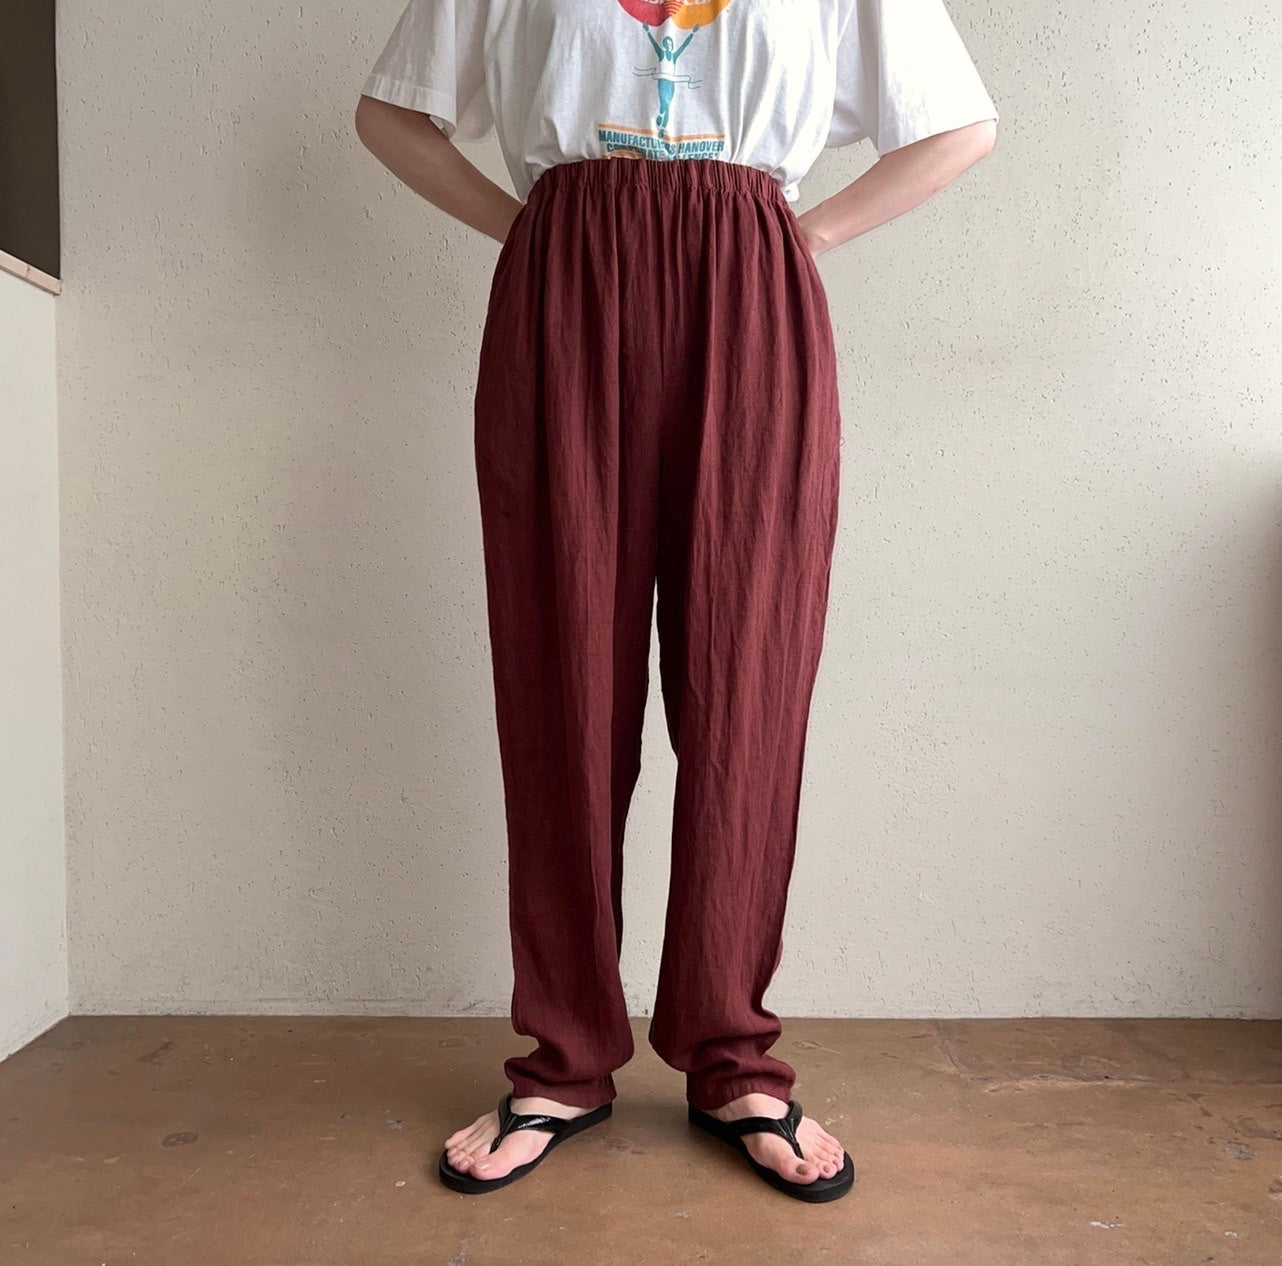 90s "Russ Berens" Two-Piece Made in USA